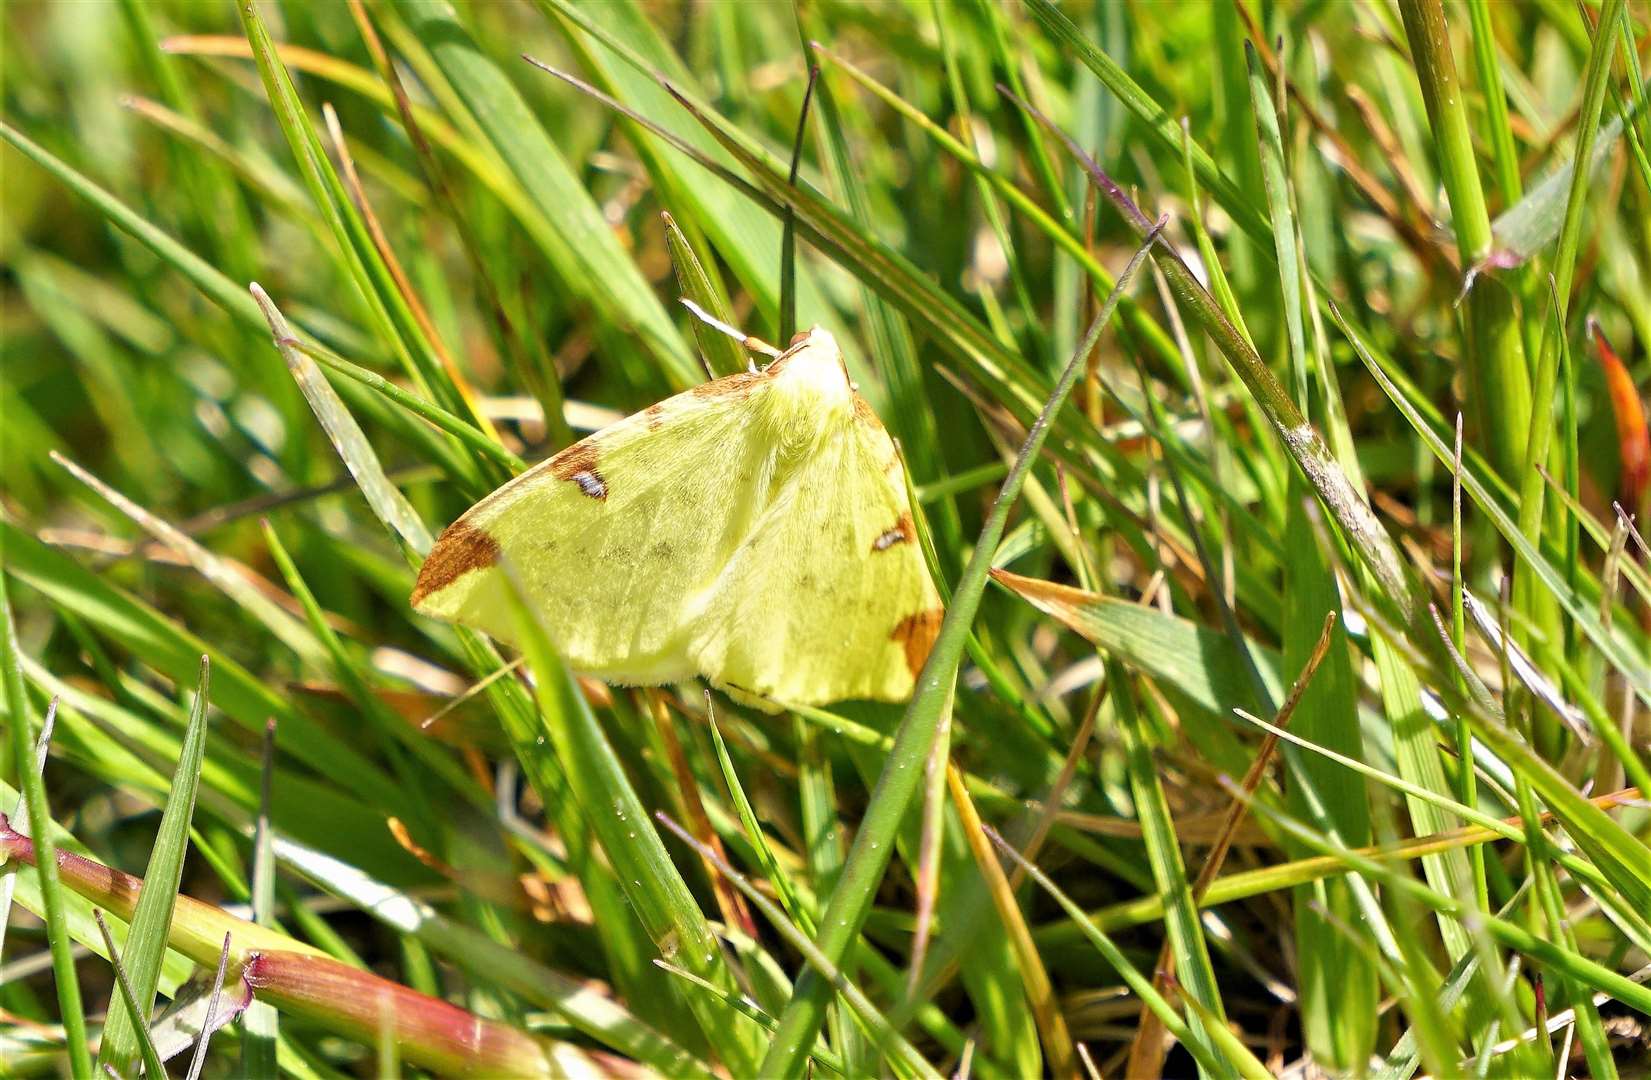 Brimstone Moth Opisthograptis luteolata can be seen in Caithness from May into July in woodlands and gardens.The bright yellow moth can be seen flying at dusk near hawthorn and rowan. This specimen was seen on Cuckoo Hill near Watten earlier this week. Picture: DGS